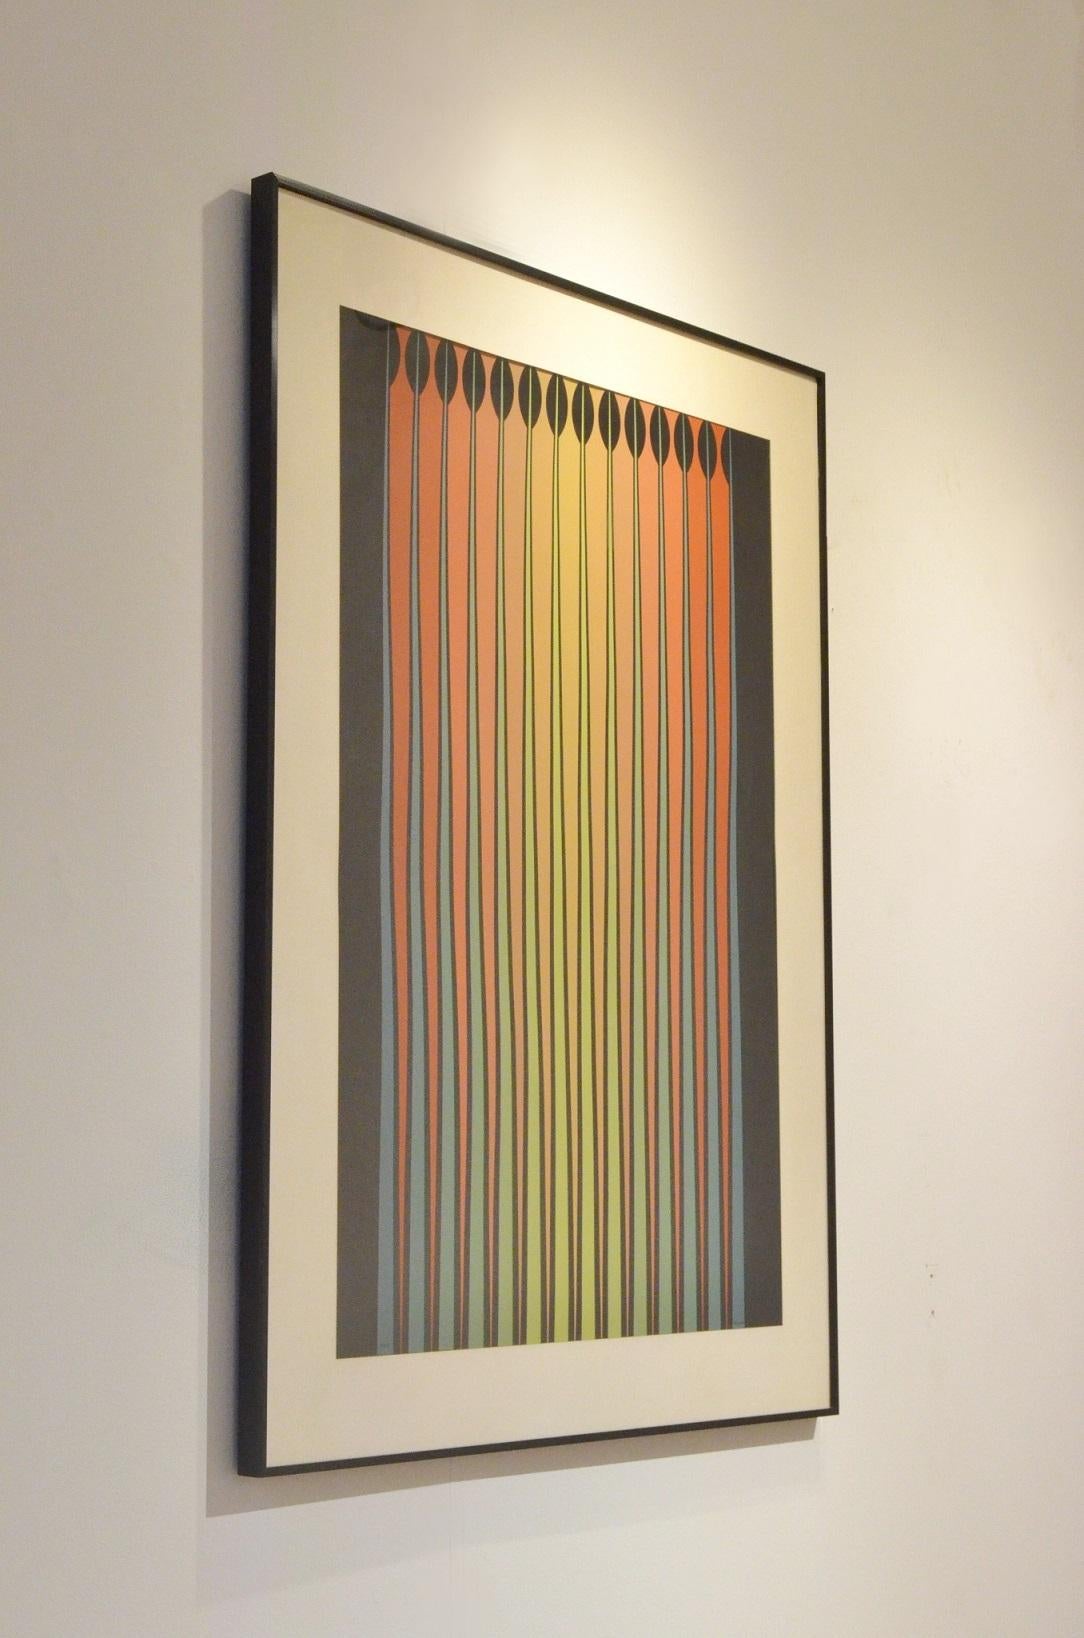 Framed Op Art painting by famous Yugoslavian pop and optical artist Dordevic Miodrag (B. 1936). Oil on Paper. Signed on bottom right.